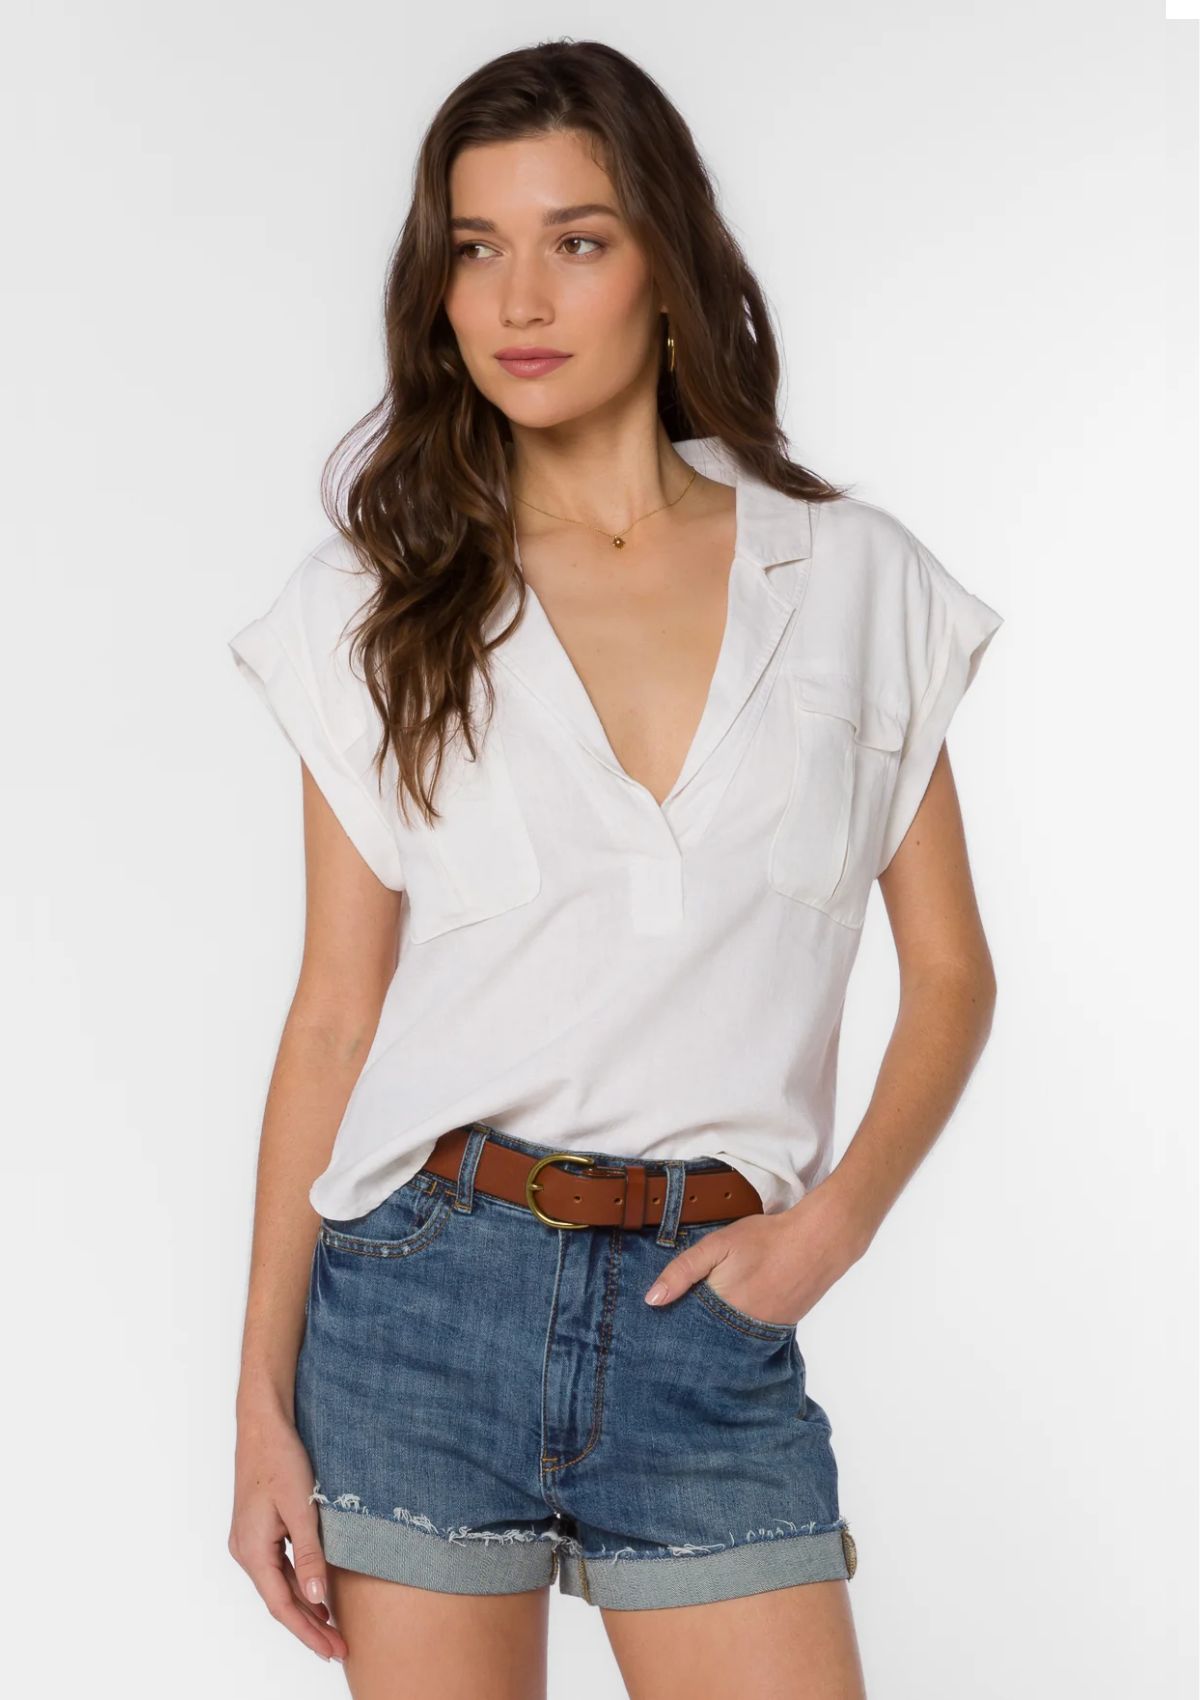 Blouses-Casual Tops-Clothing-Ruby Jane.